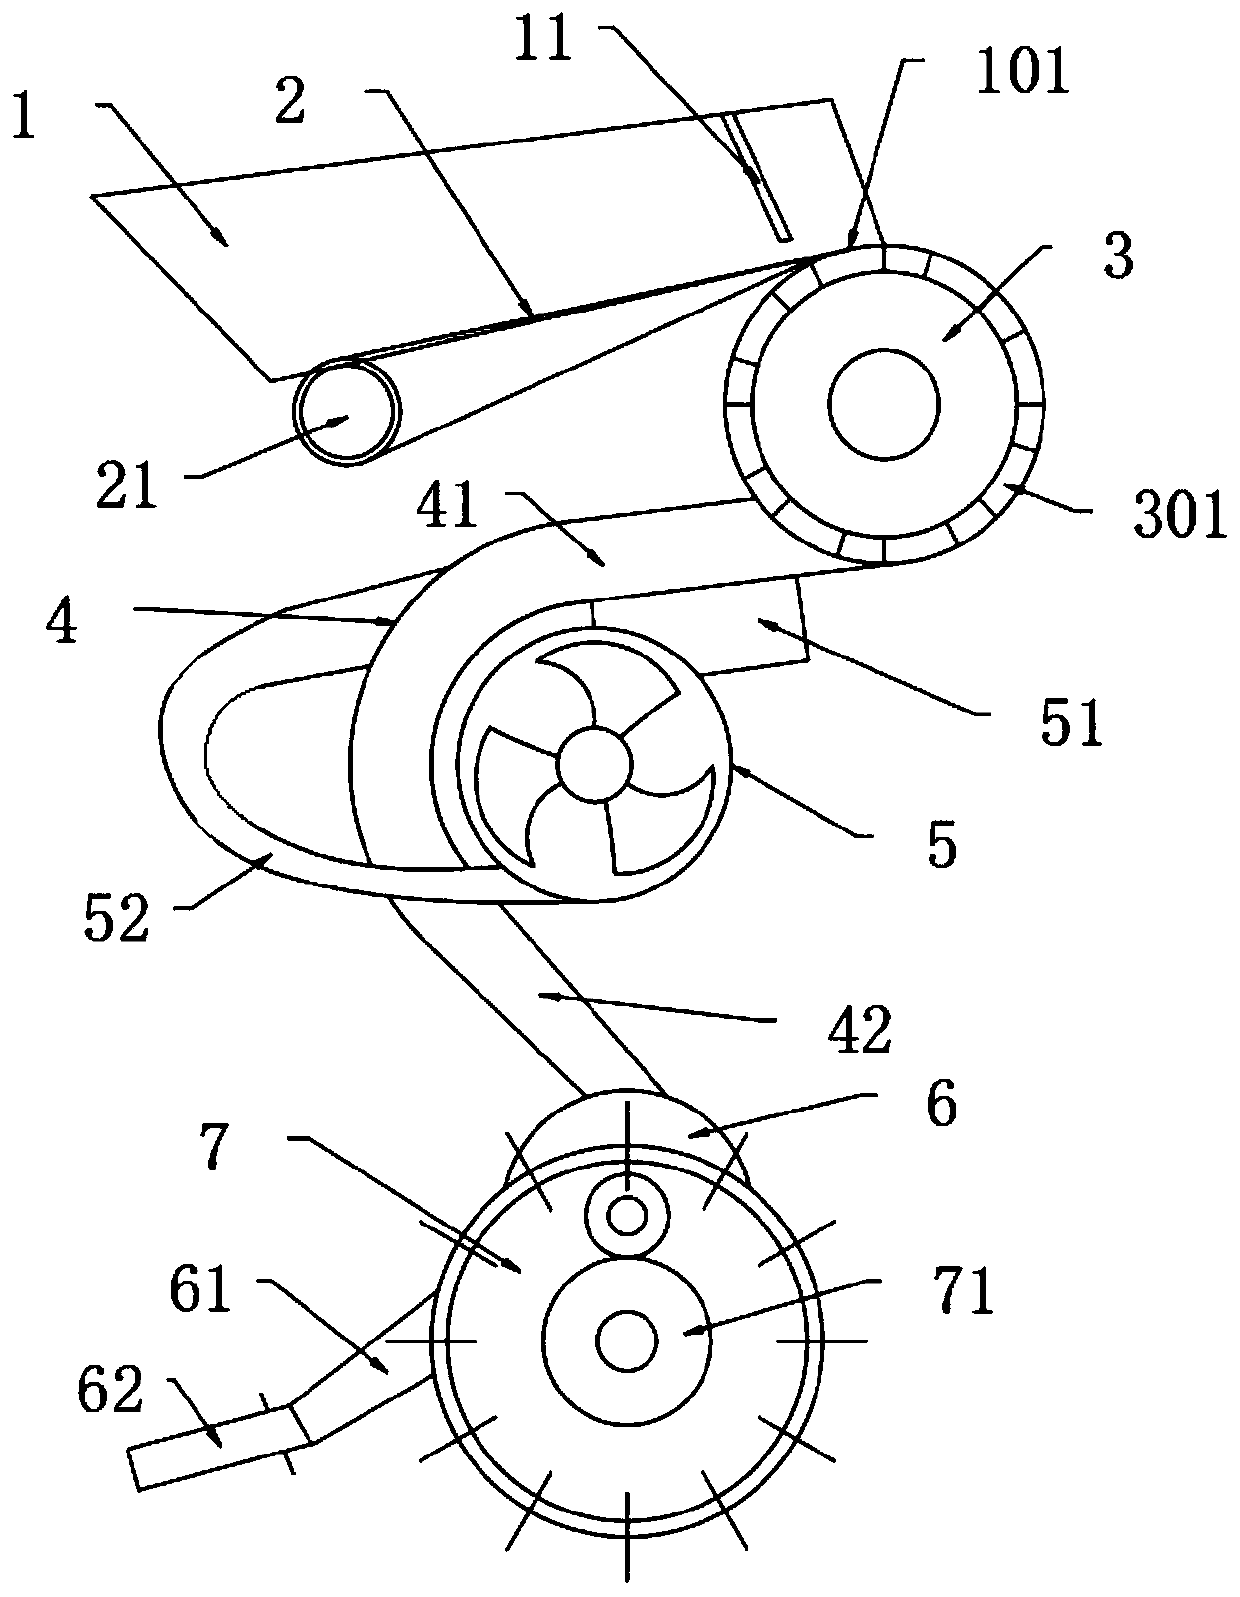 Large-grain seed directional positioning precision seeding device